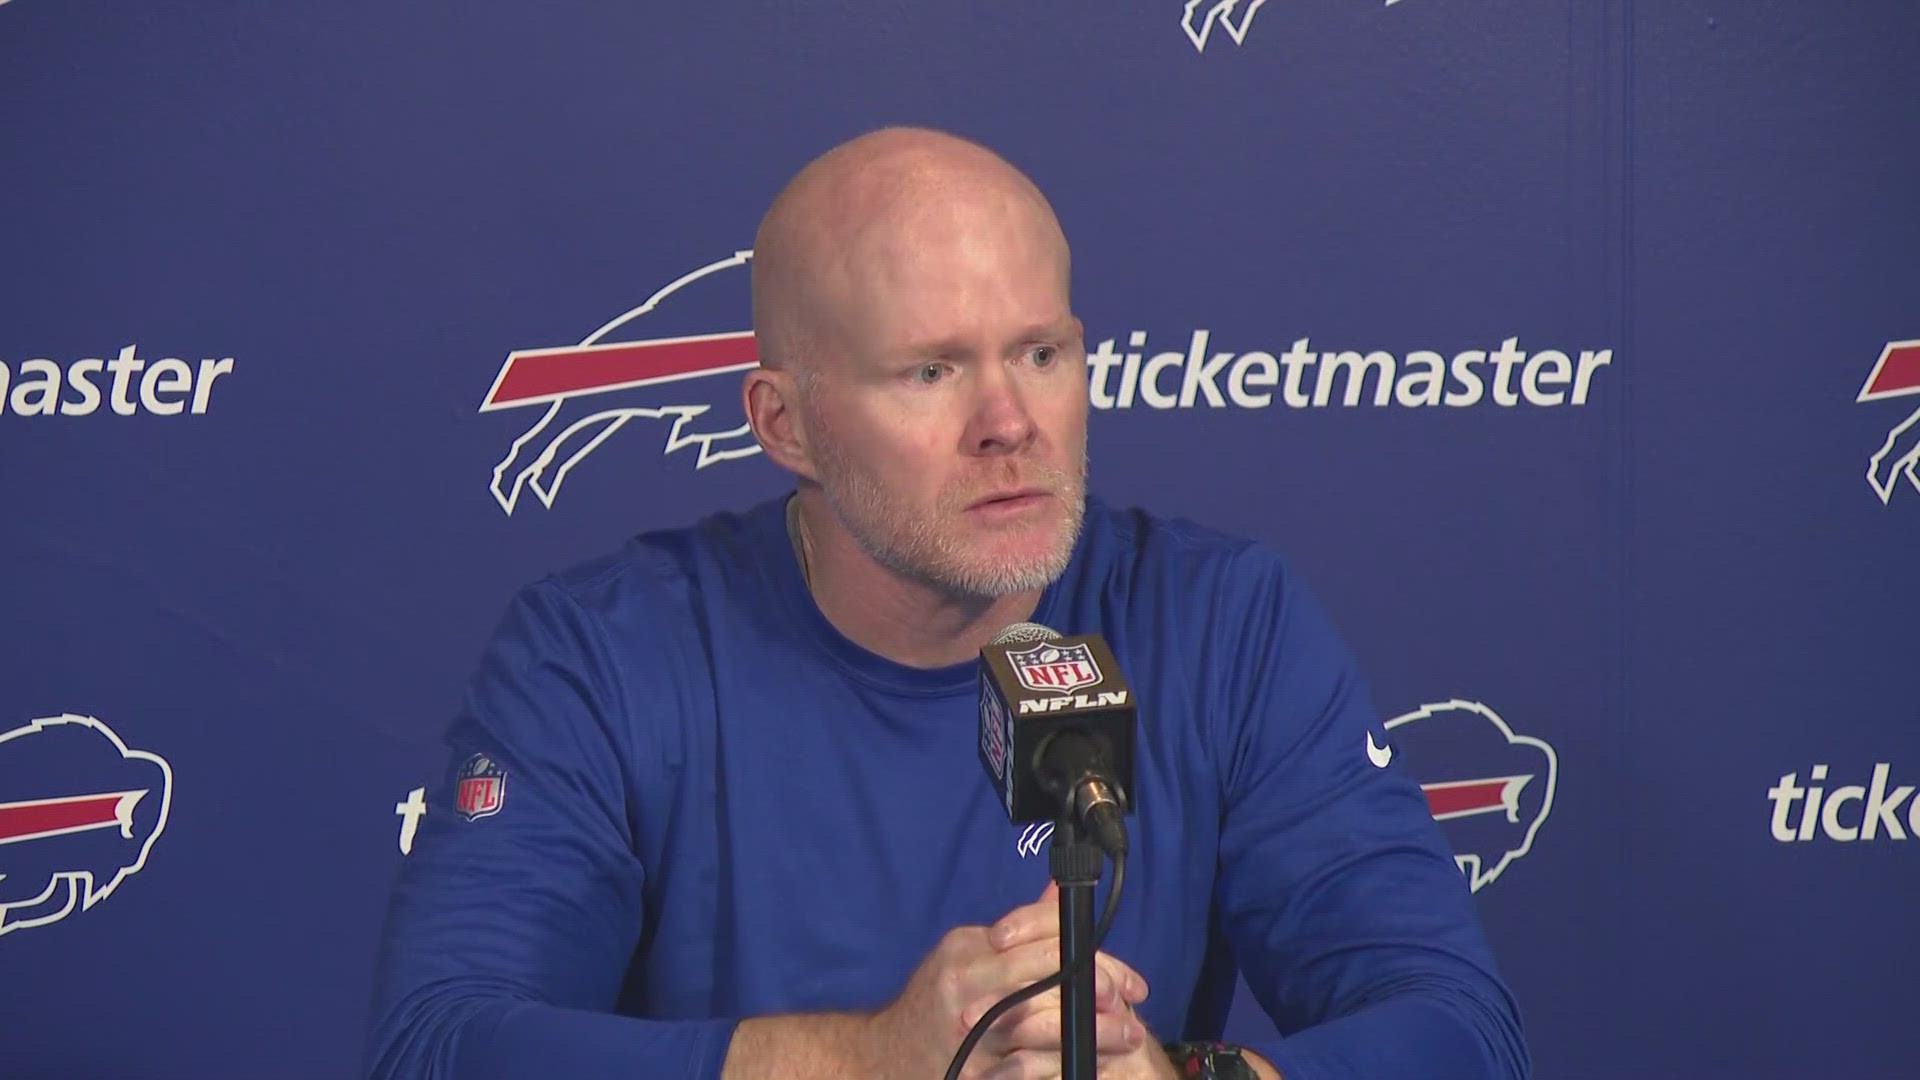 Bills news conference: Bills coach Sean McDermott spoke to media ahead of Buffalo's Week 15 home game with the Dallas Cowboys.